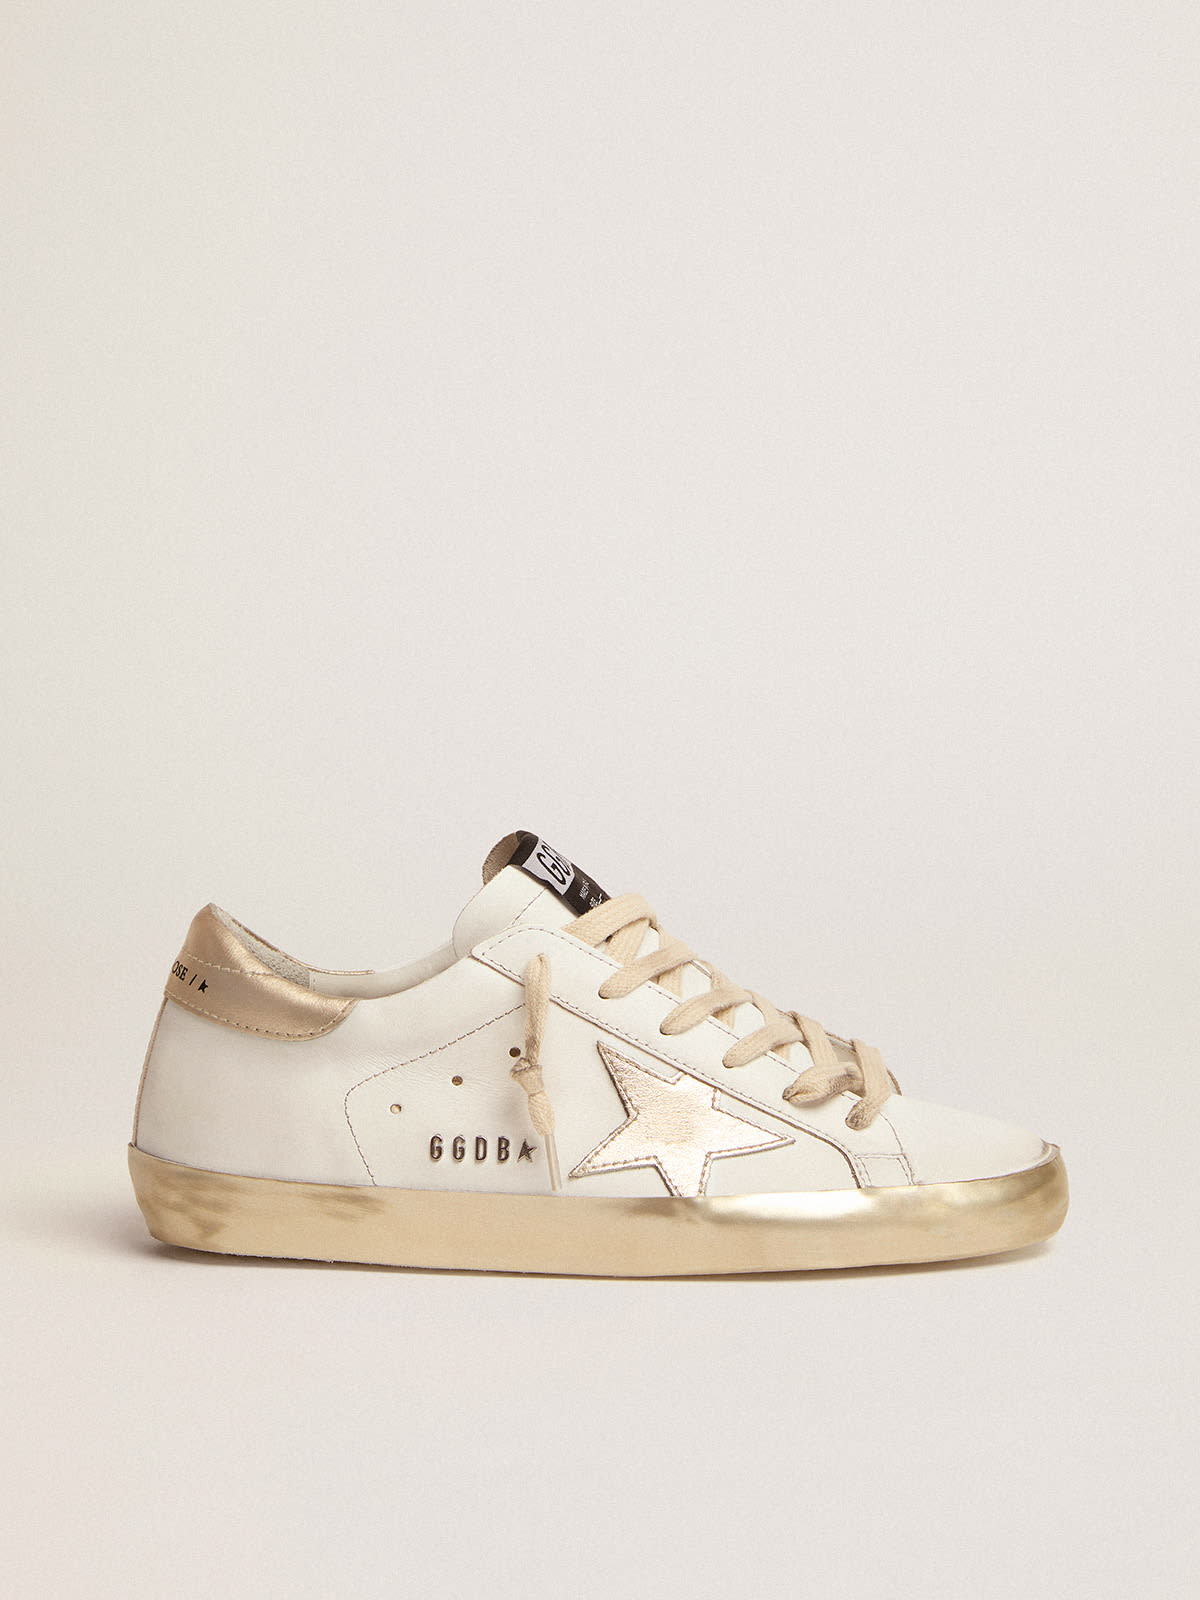 Women’s Super-Star sneakers with gold sparkle foxing and metal stud  lettering